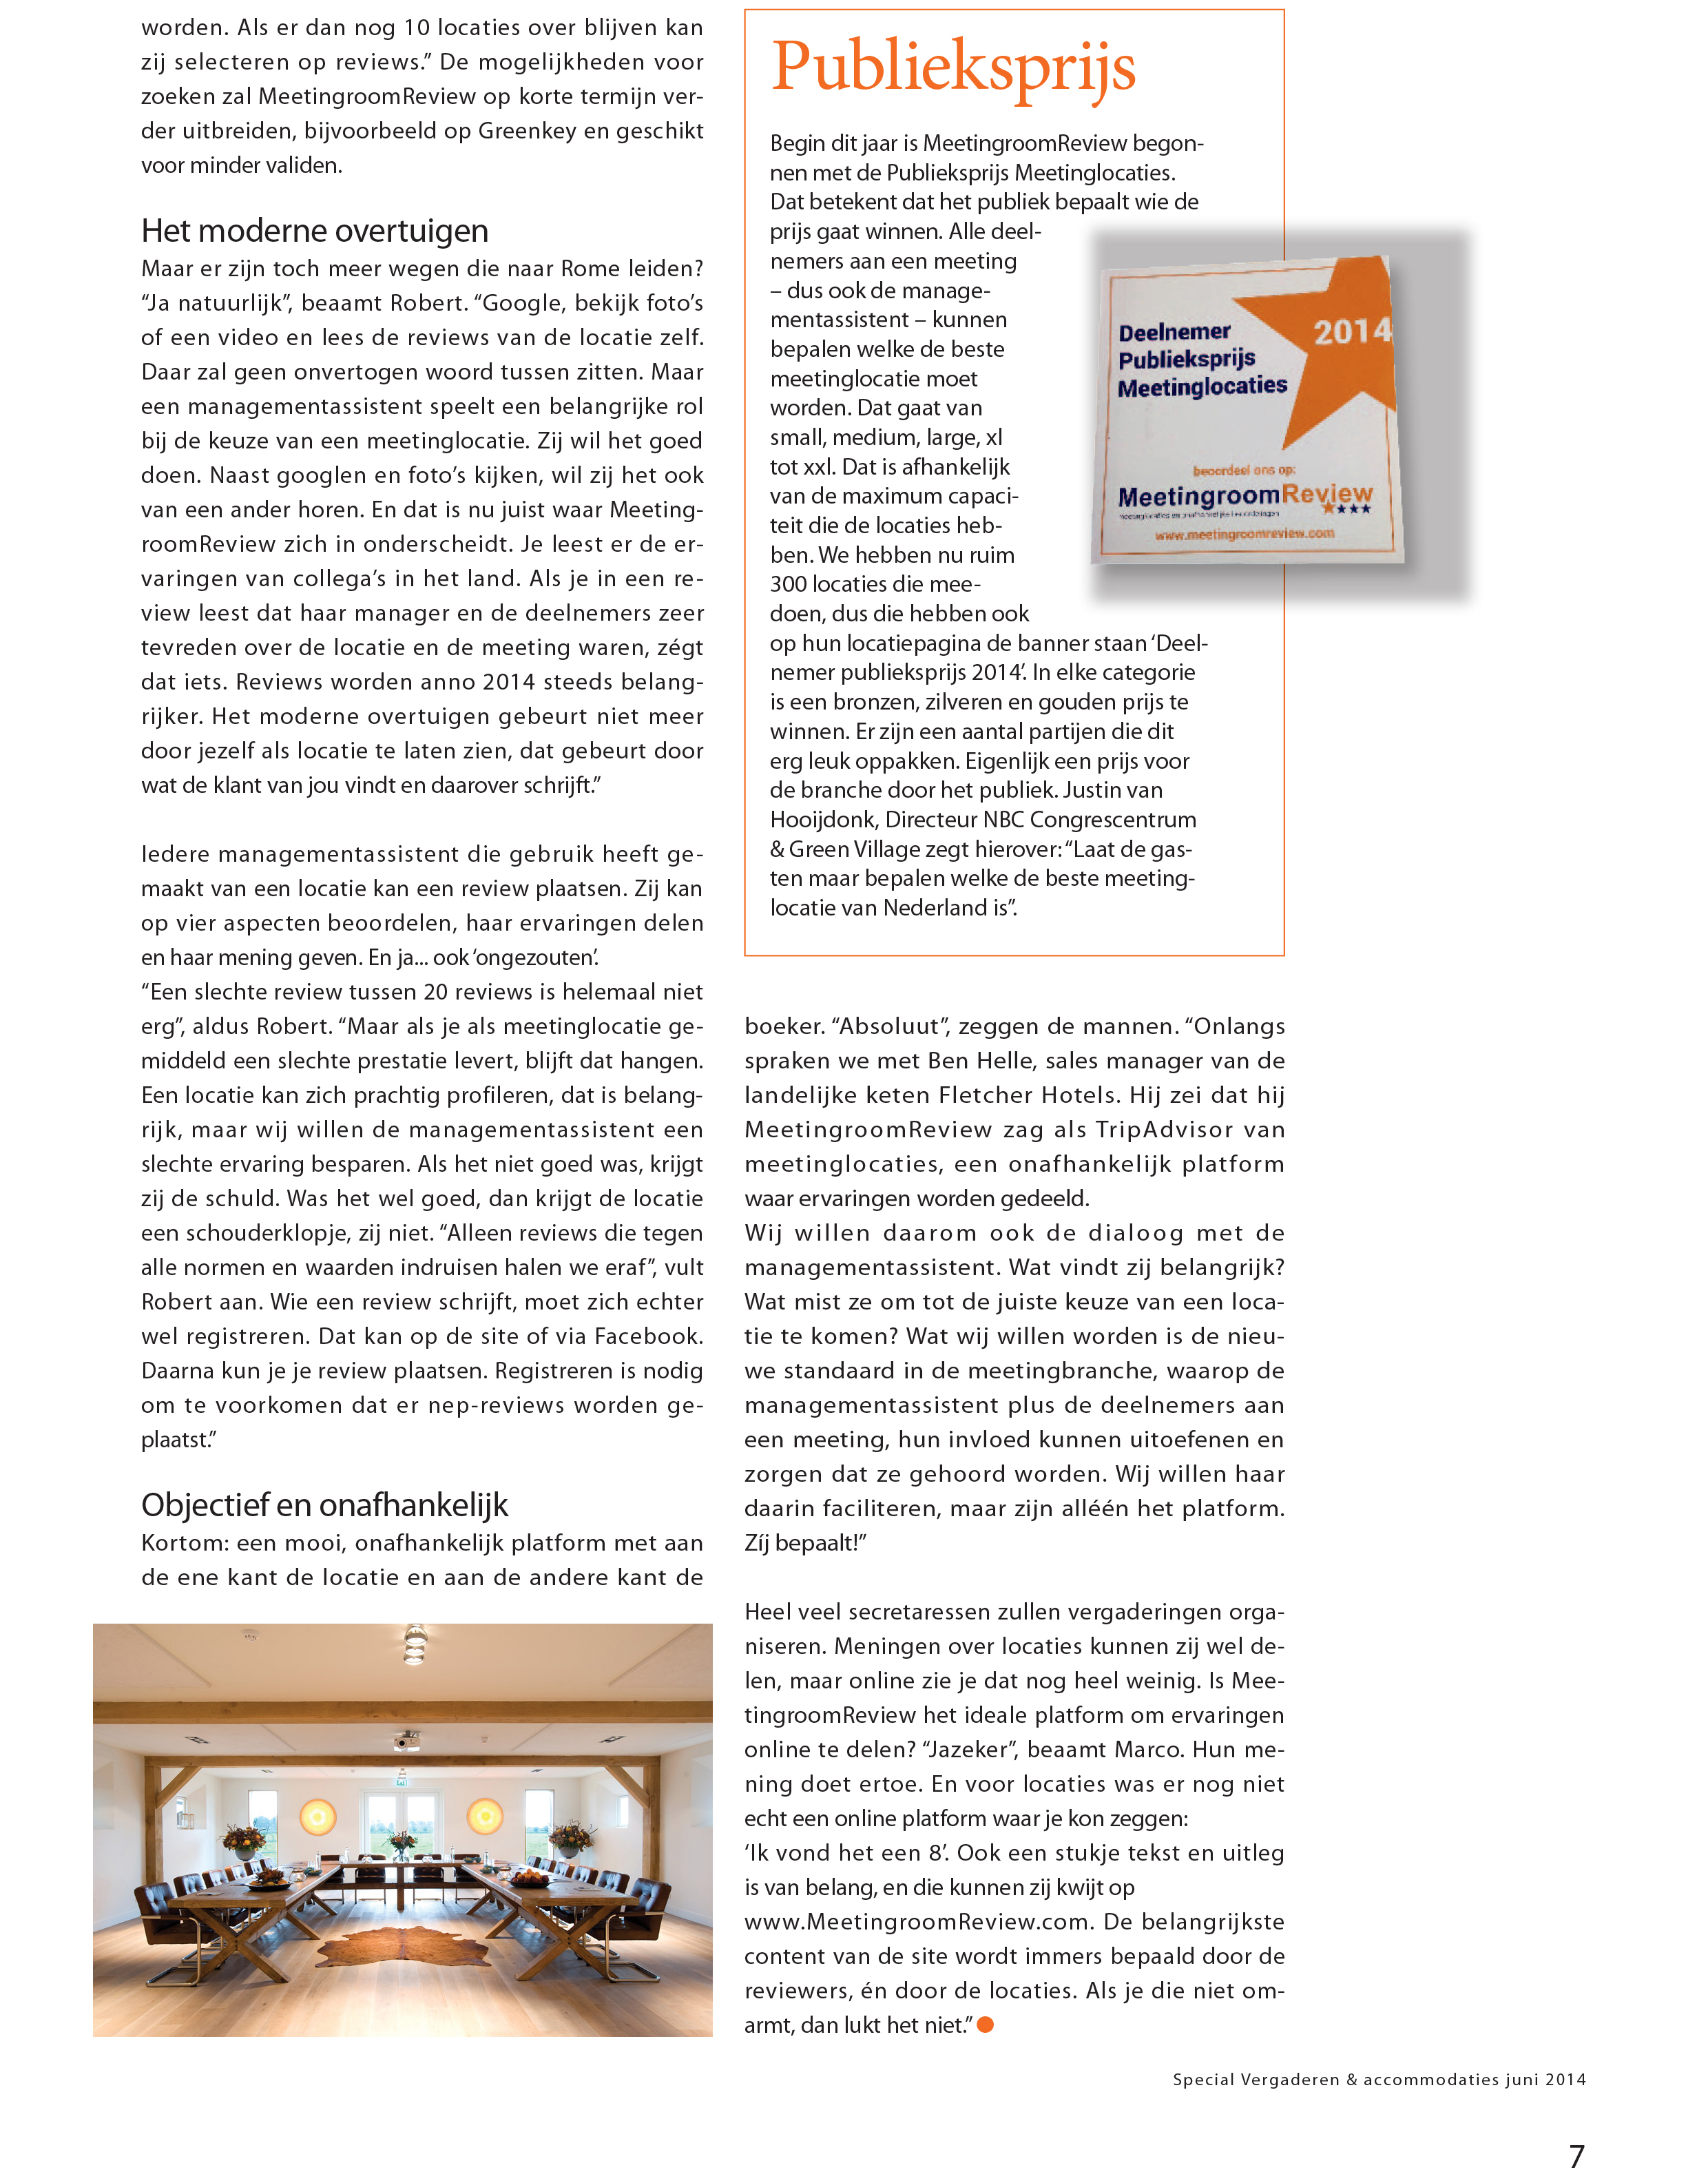 Interview MeetingReview in Management Support pagina 2